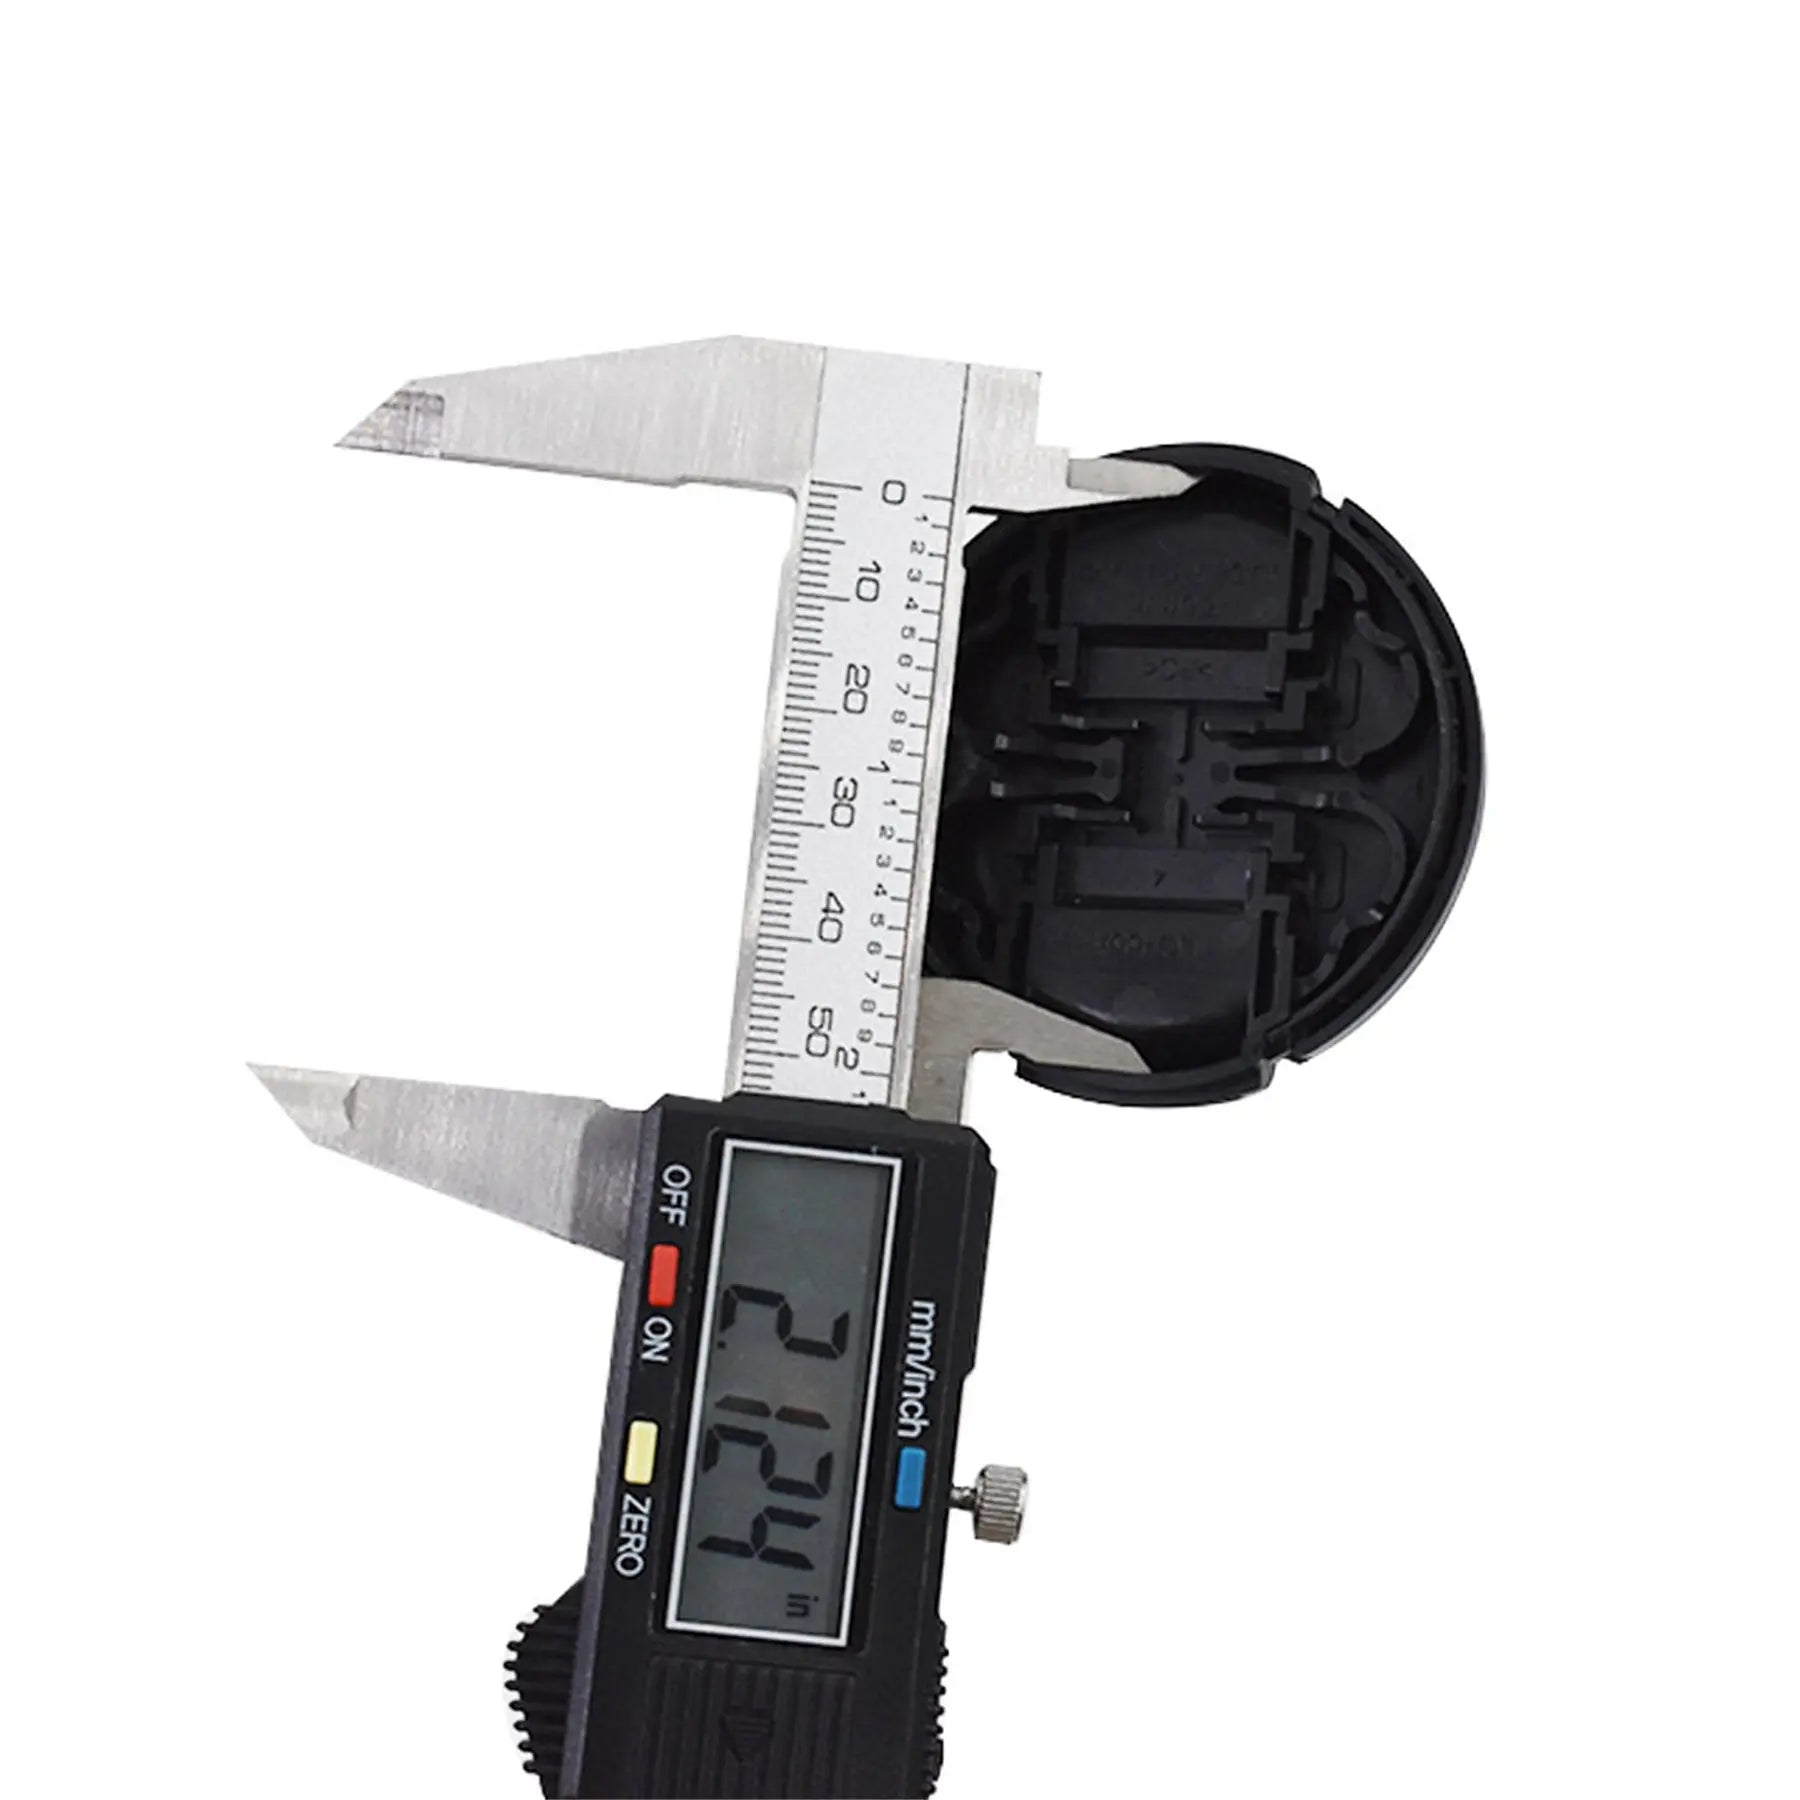 findmall Electronic Digital Caliper Stainless Steel Body with Large LCD Screen 0-6 Inches Inch/Millimeter Conversion FINDMALLPARTS